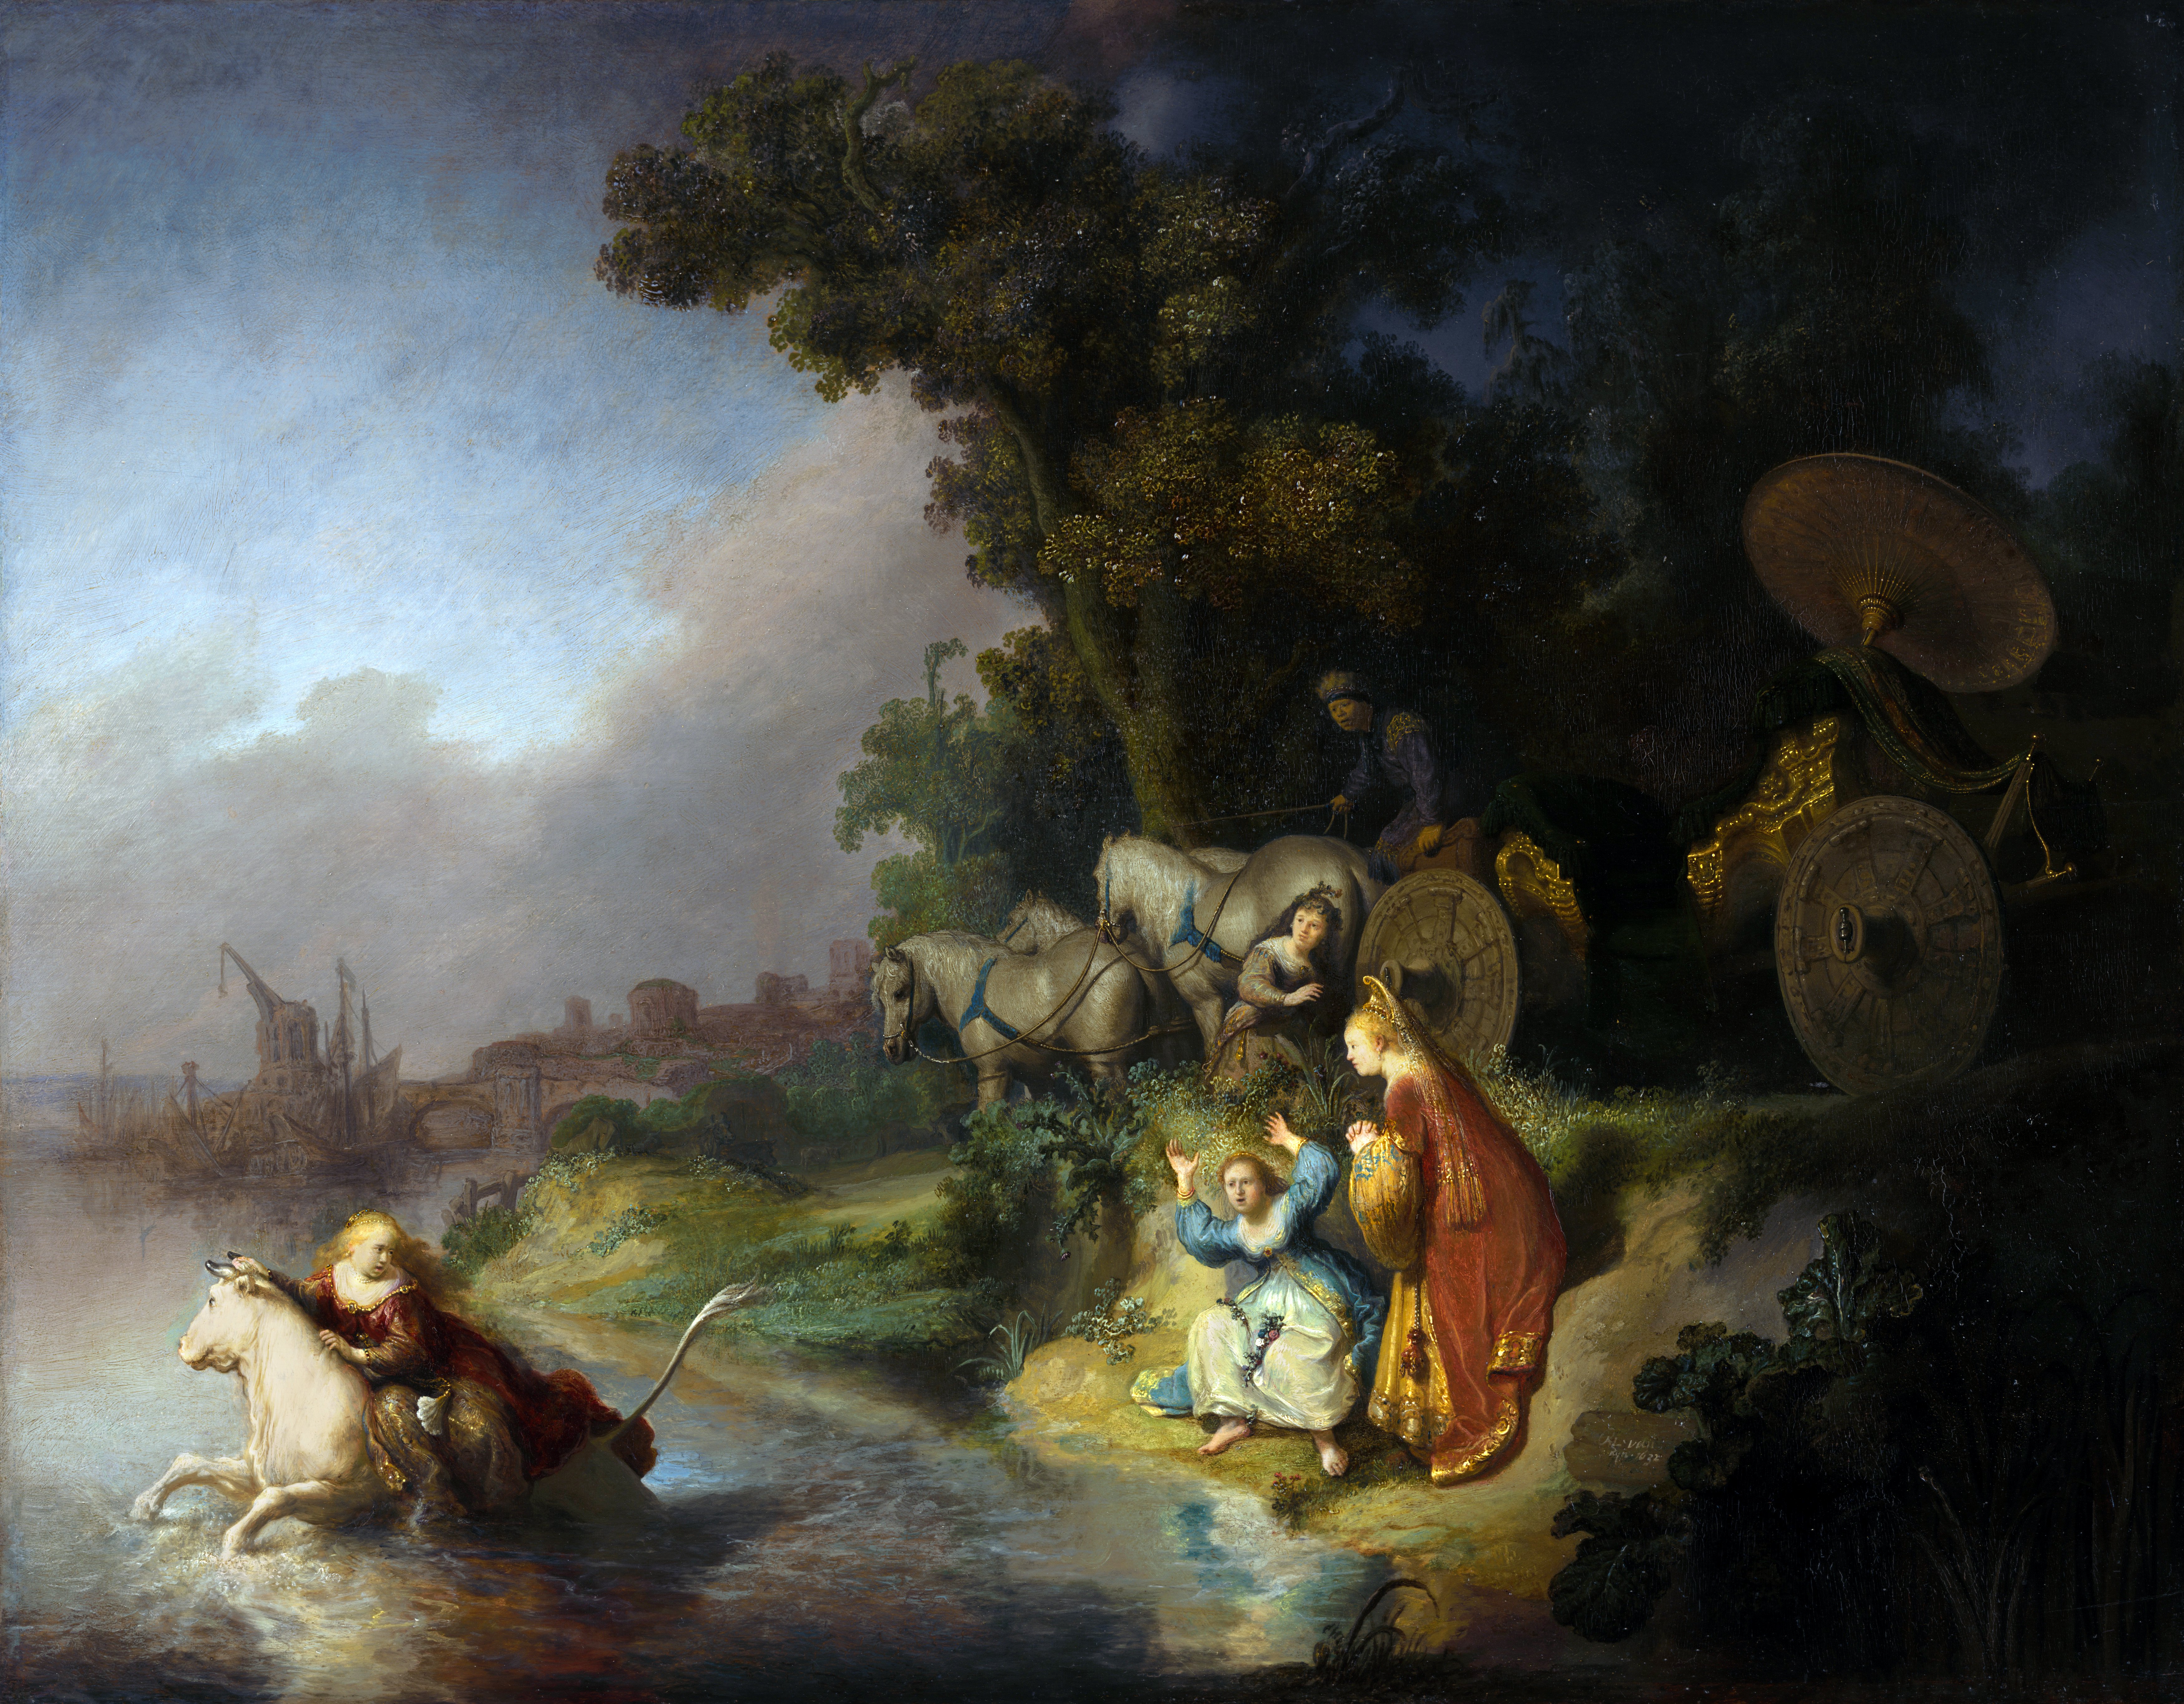 http://upload.wikimedia.org/wikipedia/commons/5/56/Rembrandt_Abduction_of_Europa.jpg